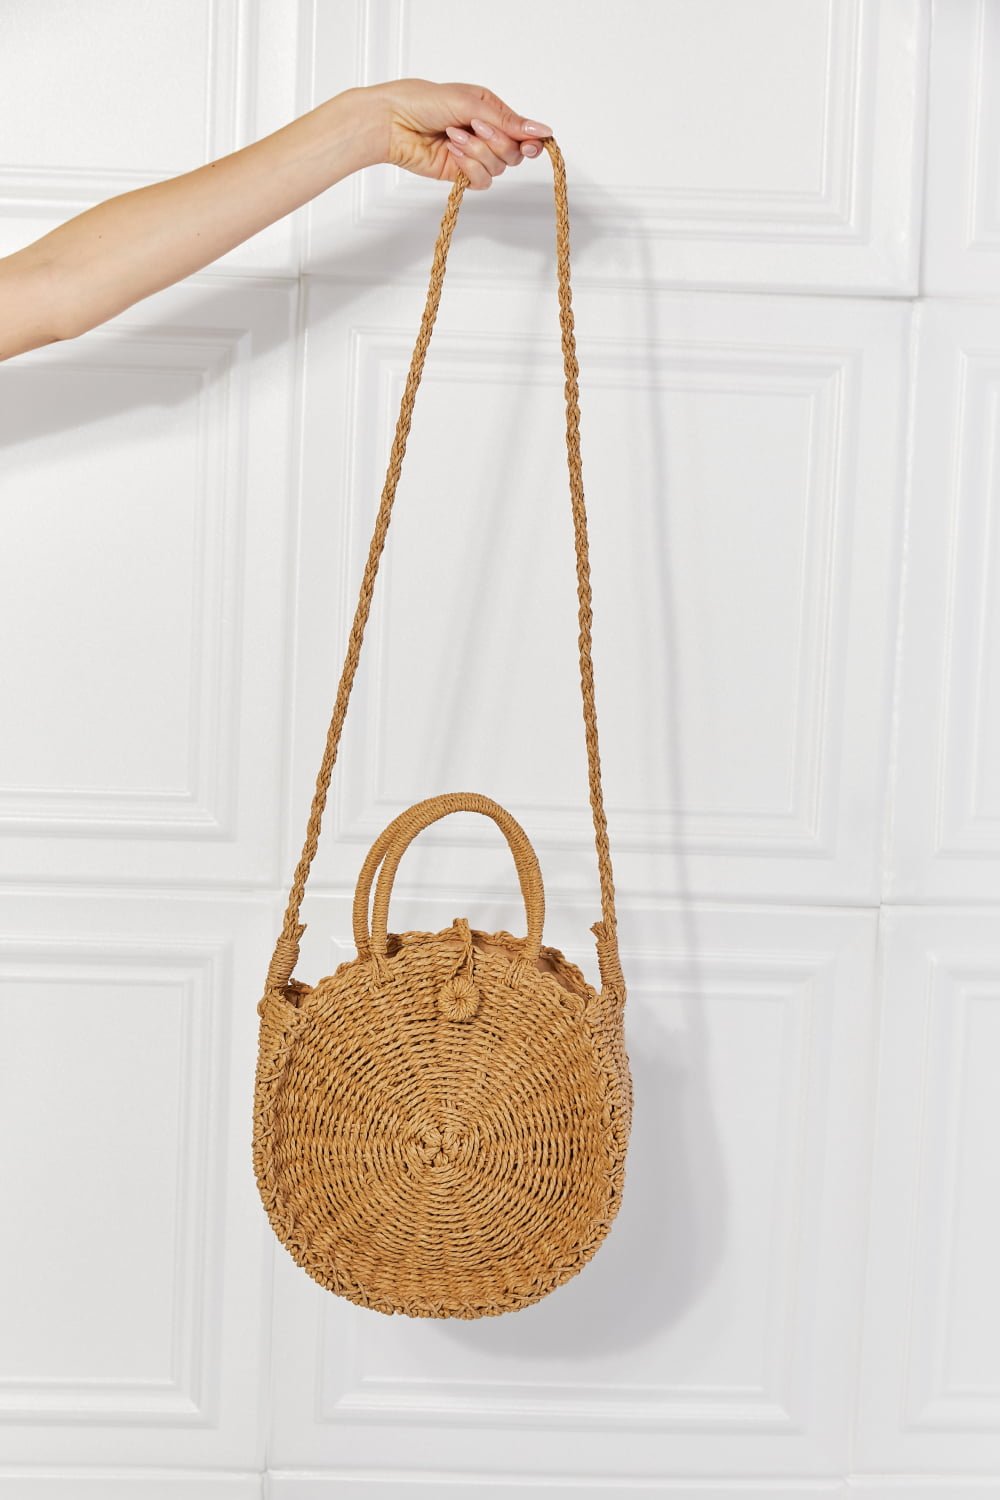 Justin Taylor Feeling Cute Rounded Rattan Handbag in Camel - Fashion Girl Online Store